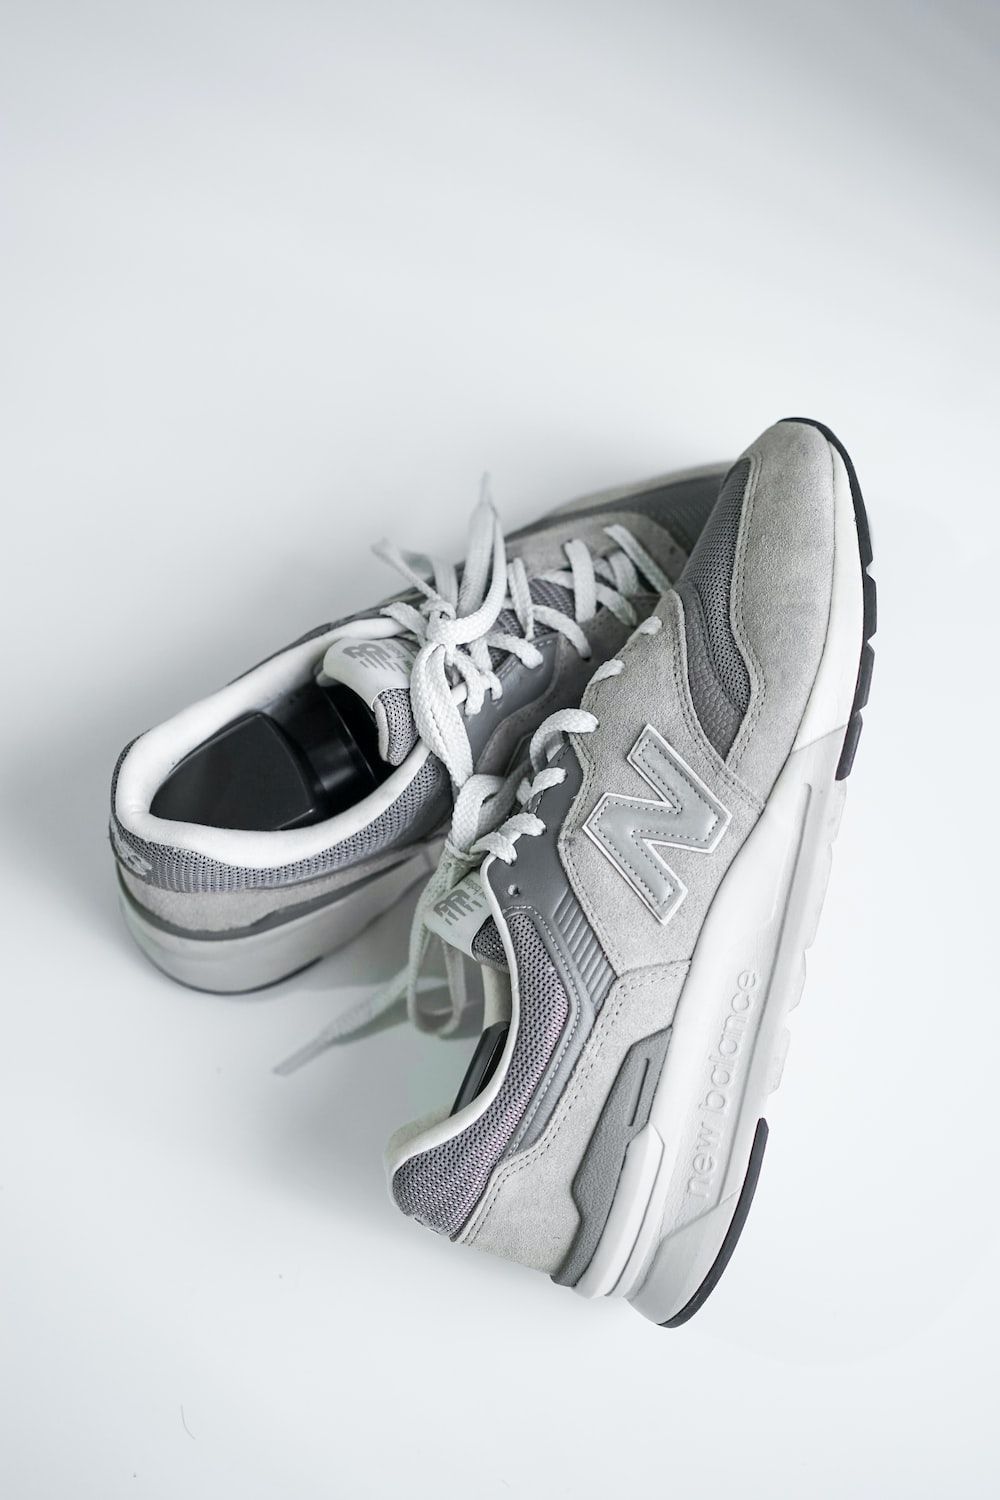 A pair of grey New Balance sneakers on a white background - New Balance